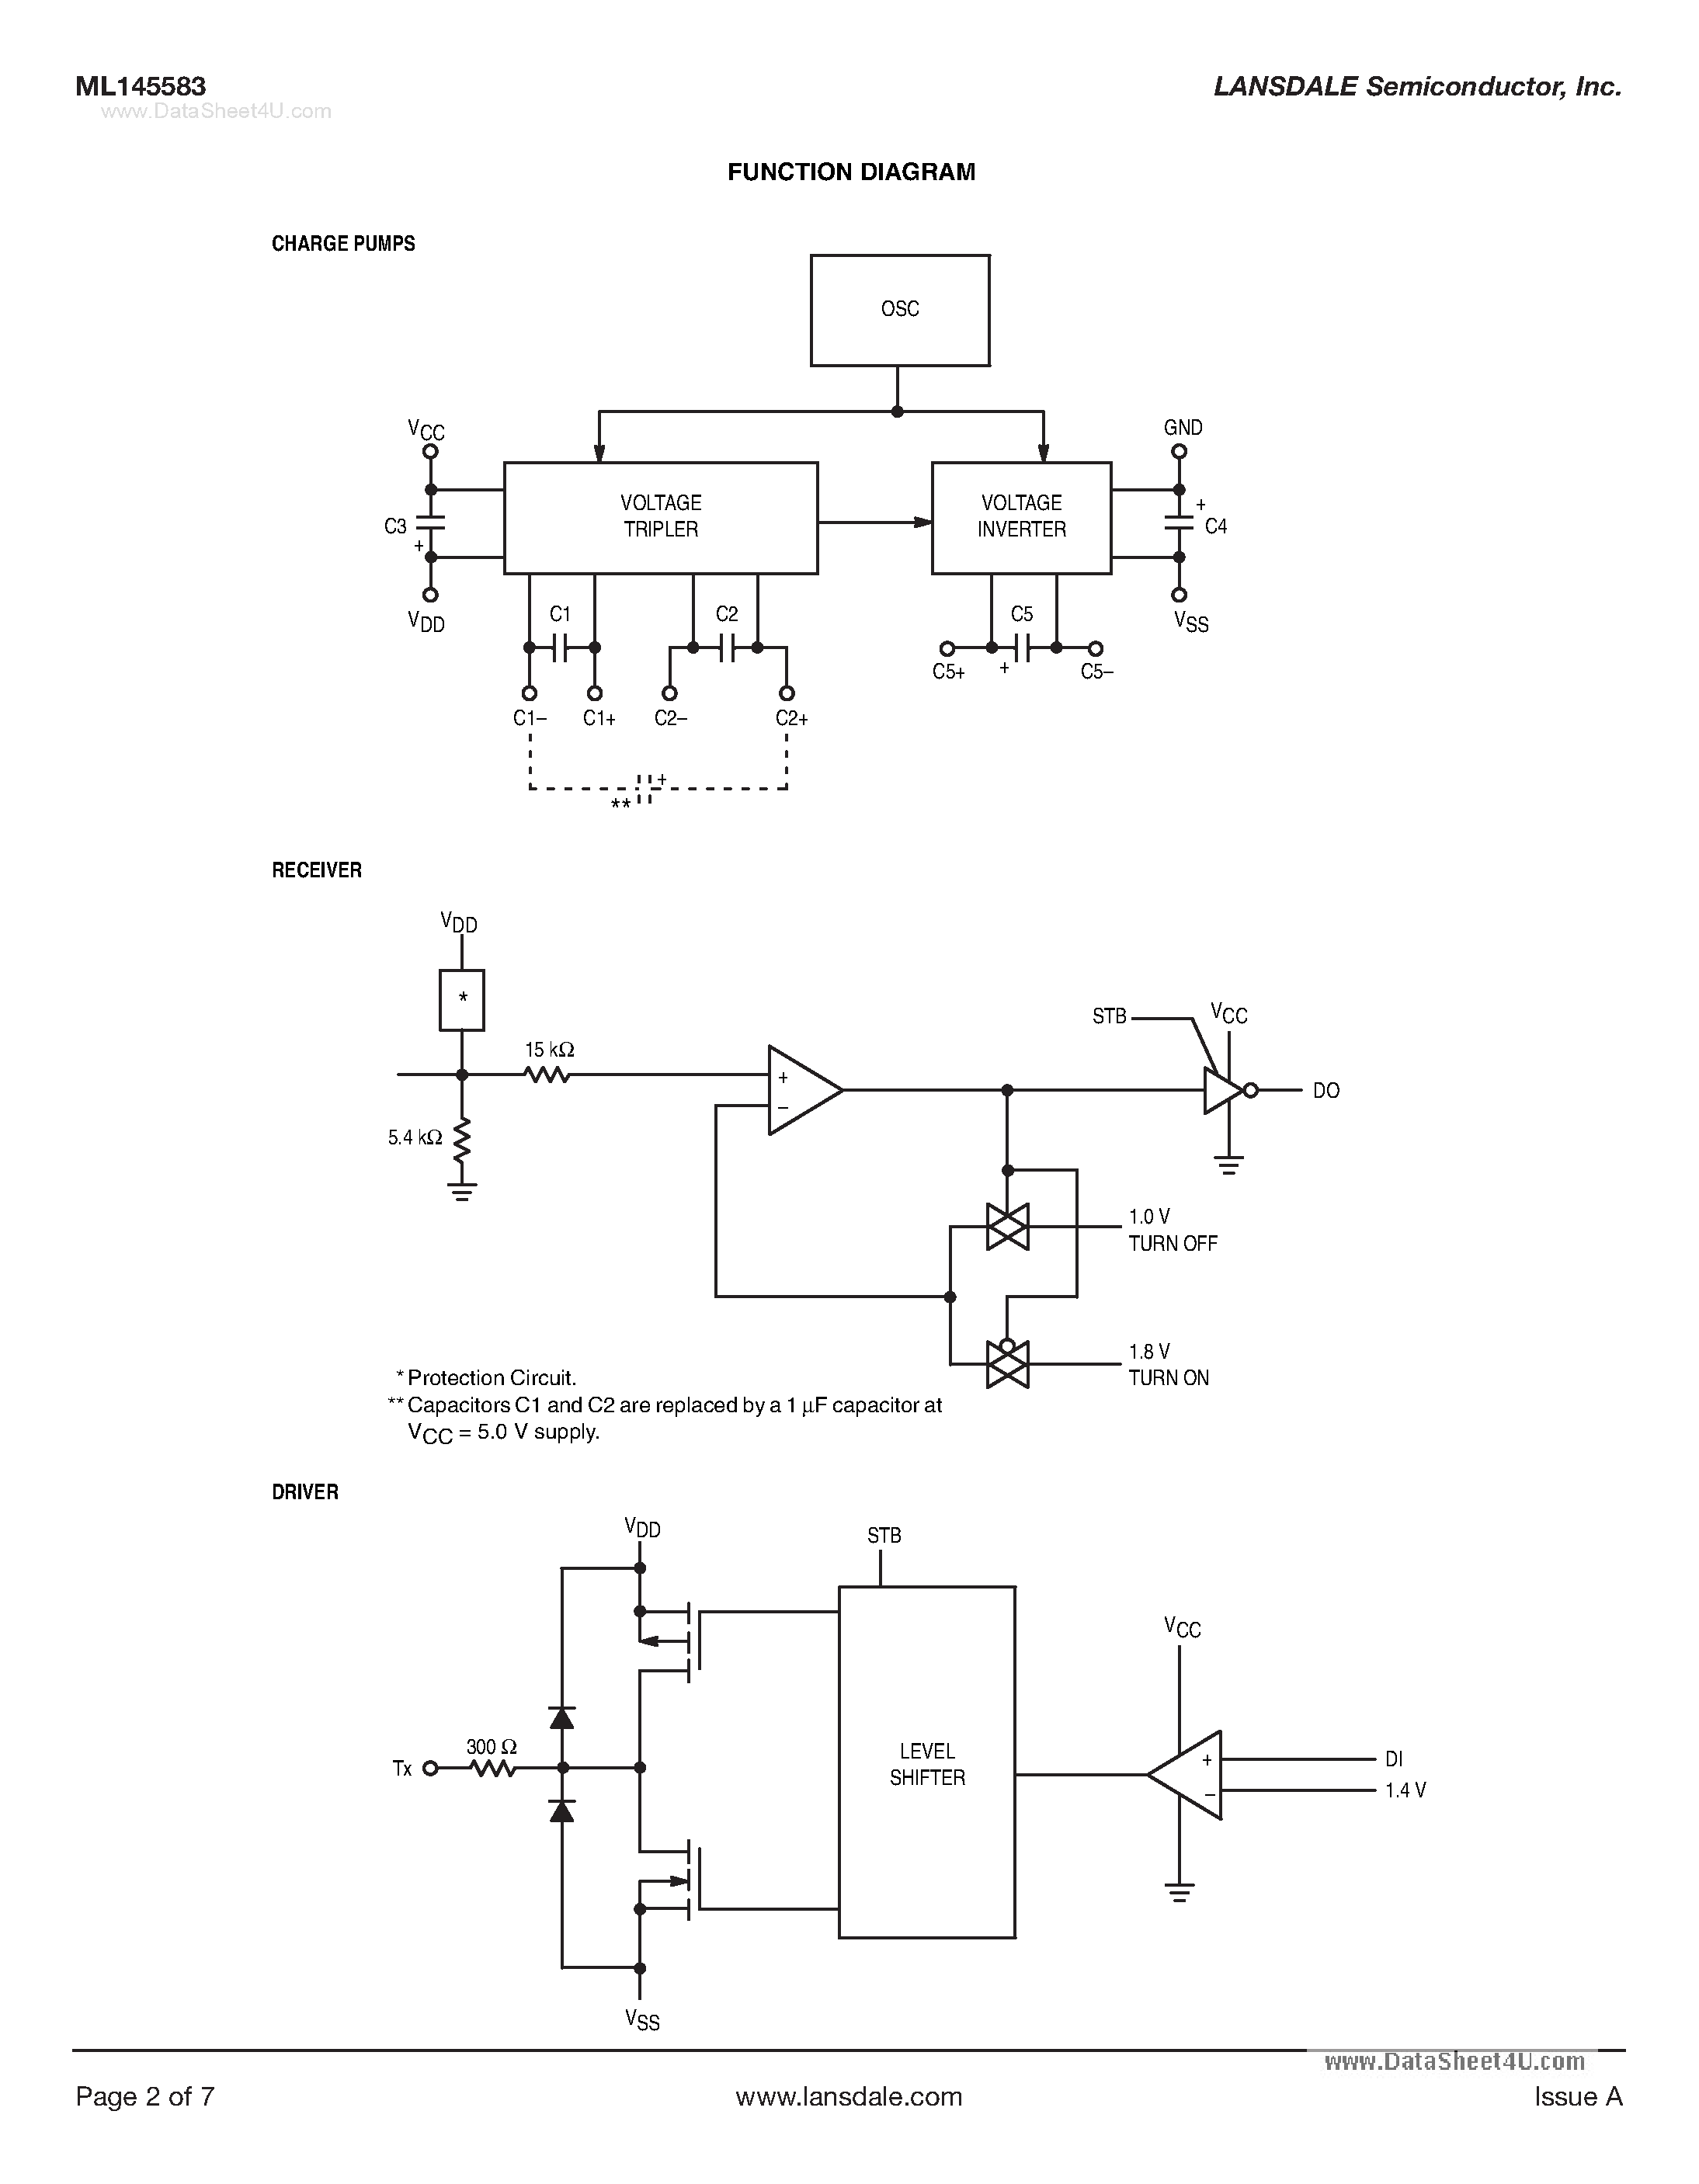 Datasheet ML145583 - 3.3 Volt Only Driver/Receiver page 2